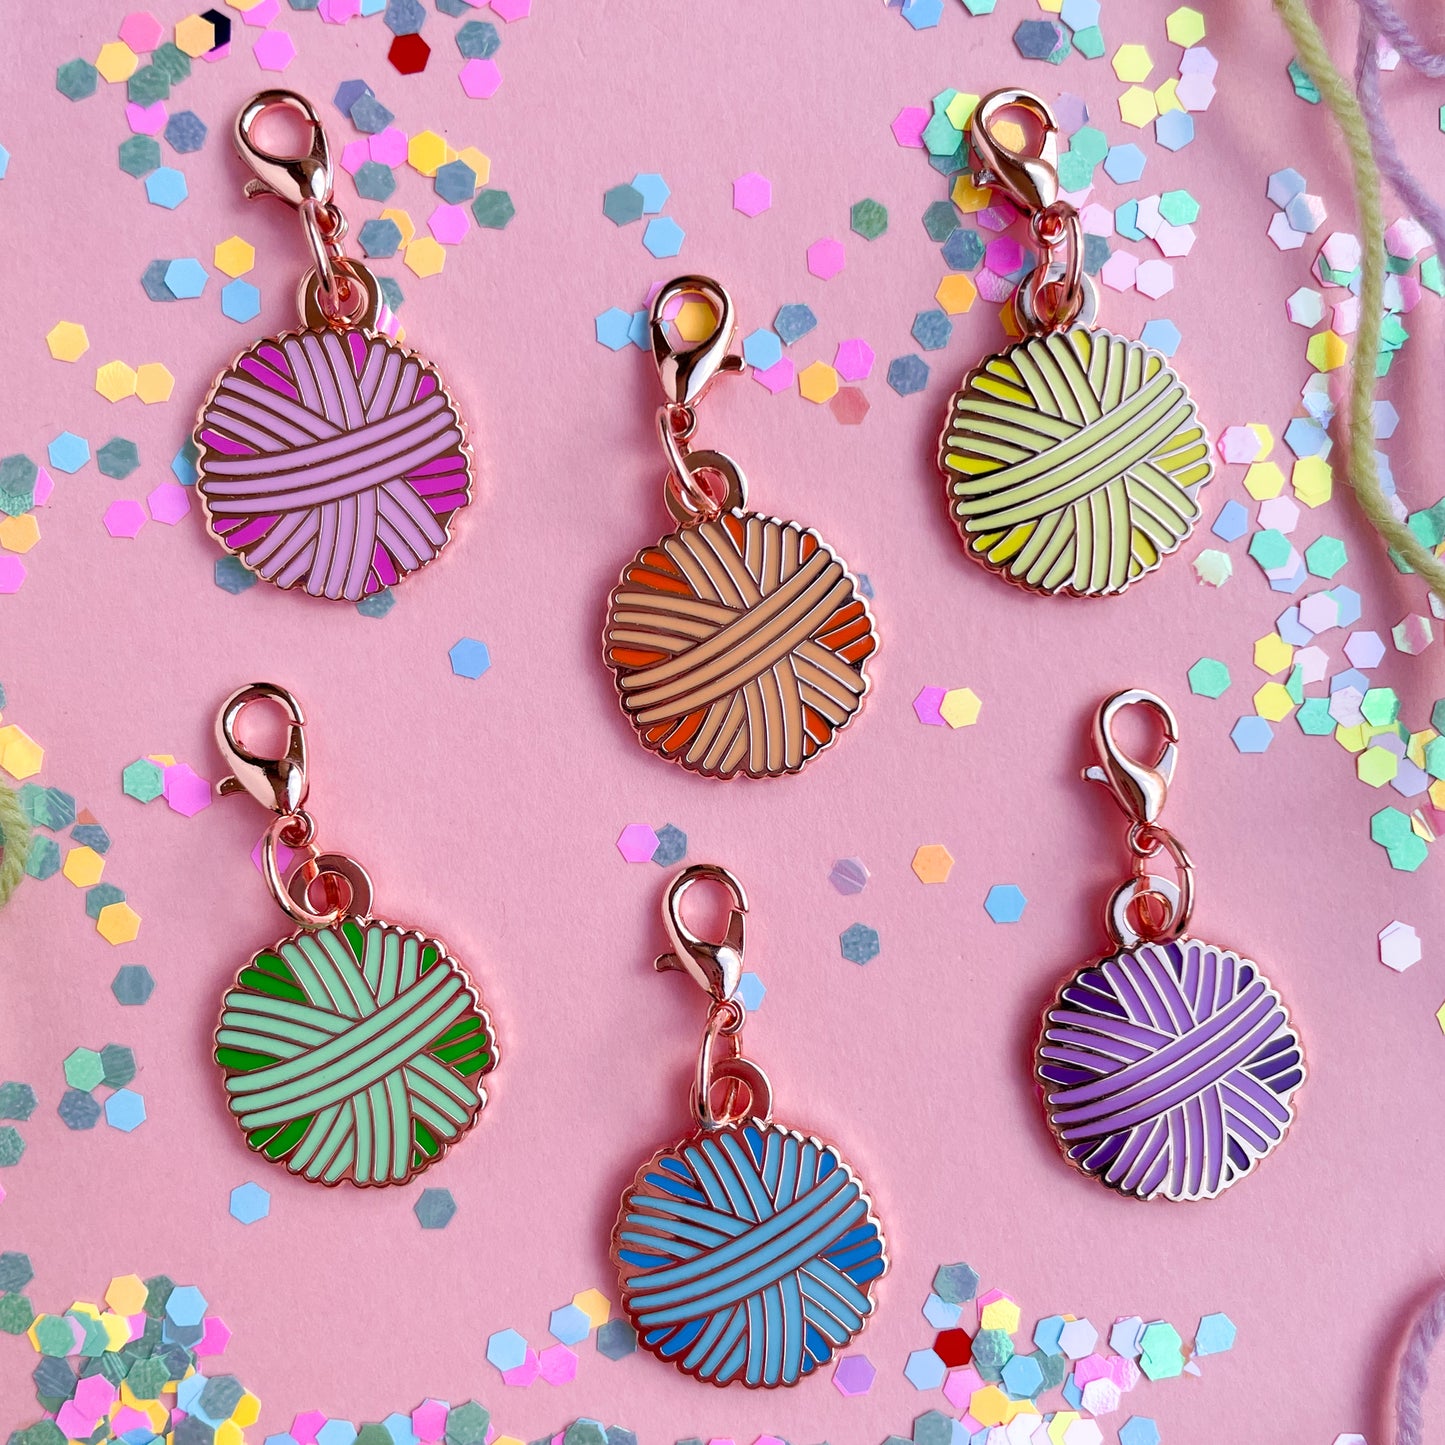 Six lobster claw clasp charms shaped like yarn balls in pink, orange, yellow, mint, blue, and purple on a pink background covered in confetti. 